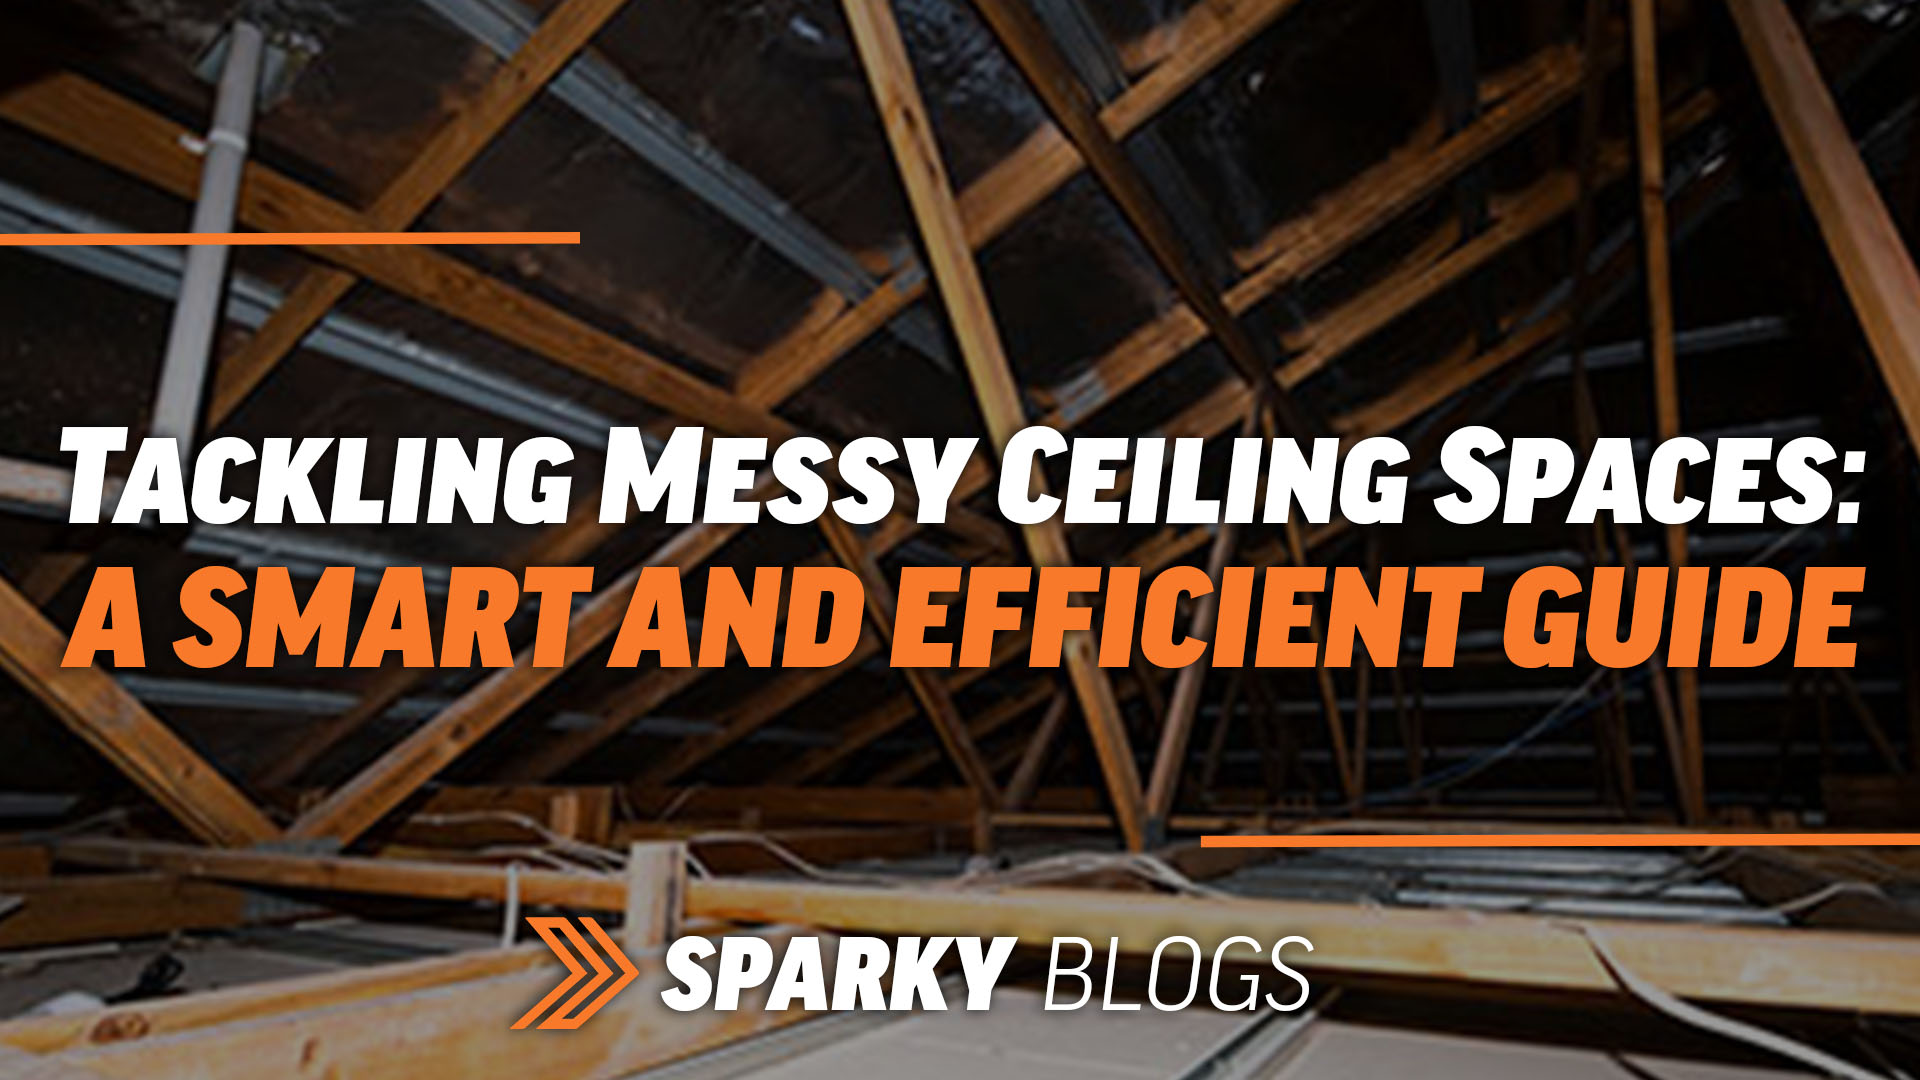 Tackling Messy Ceiling Spaces: A Smart and Efficient Guide image